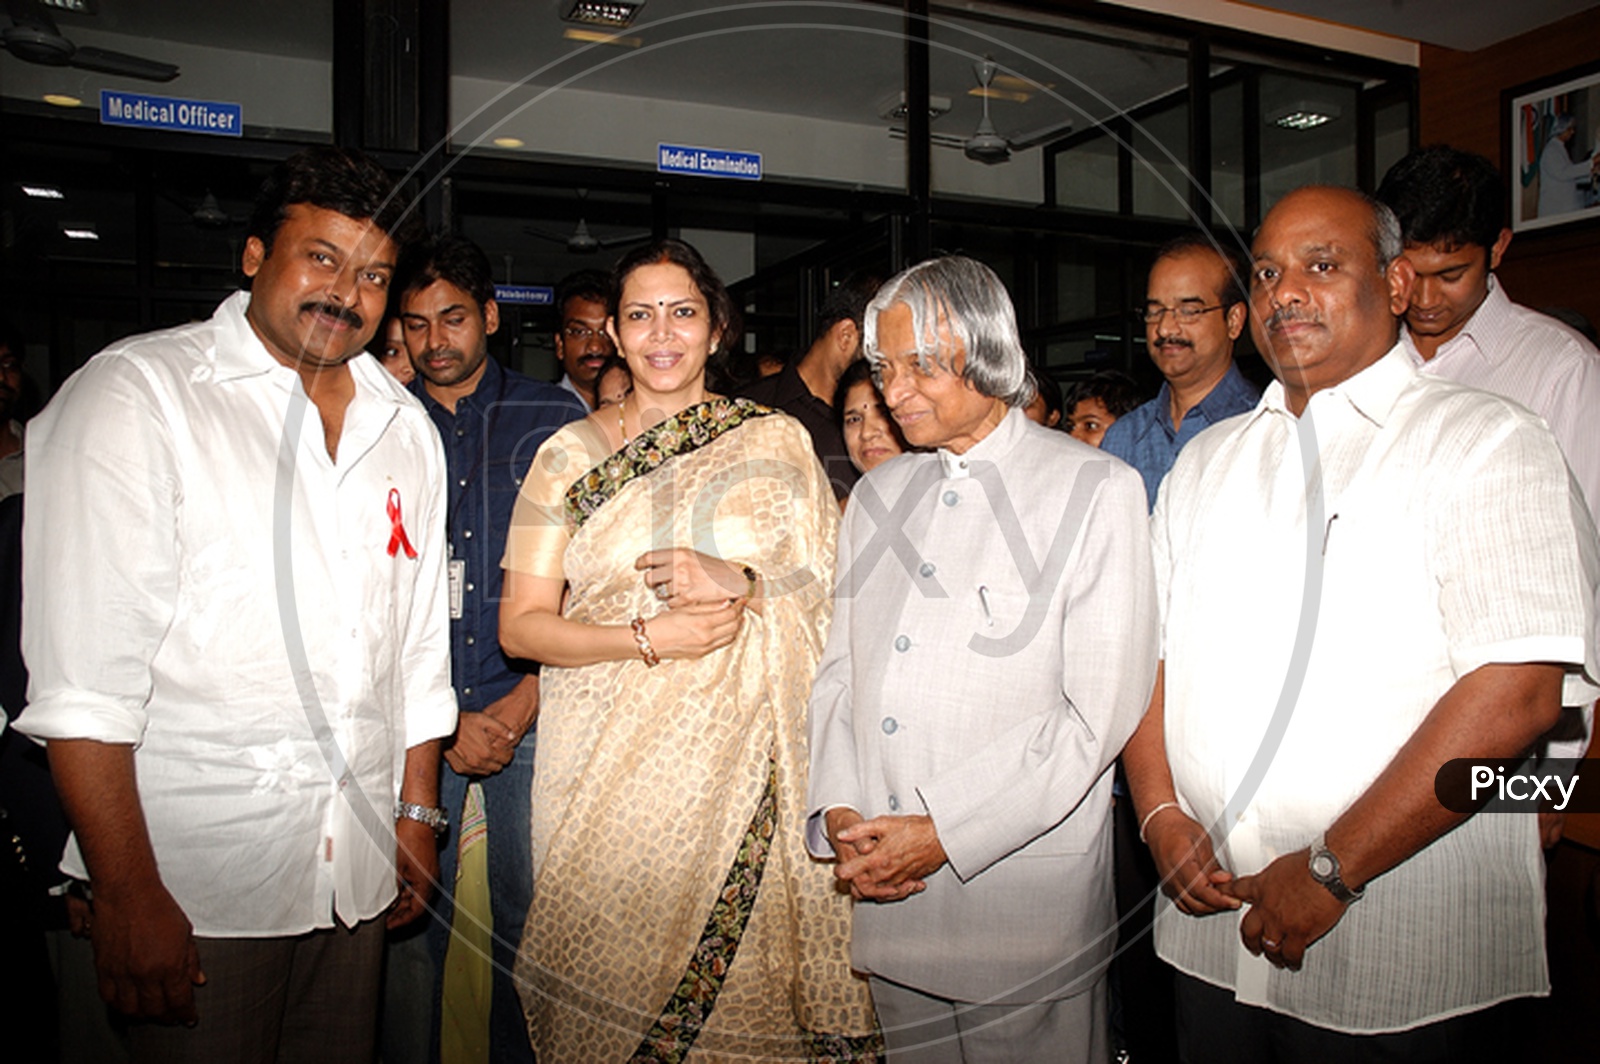 Chiranjeevi with President of India Dr.Abdul Kalam, Pawan Kalyan is also seen